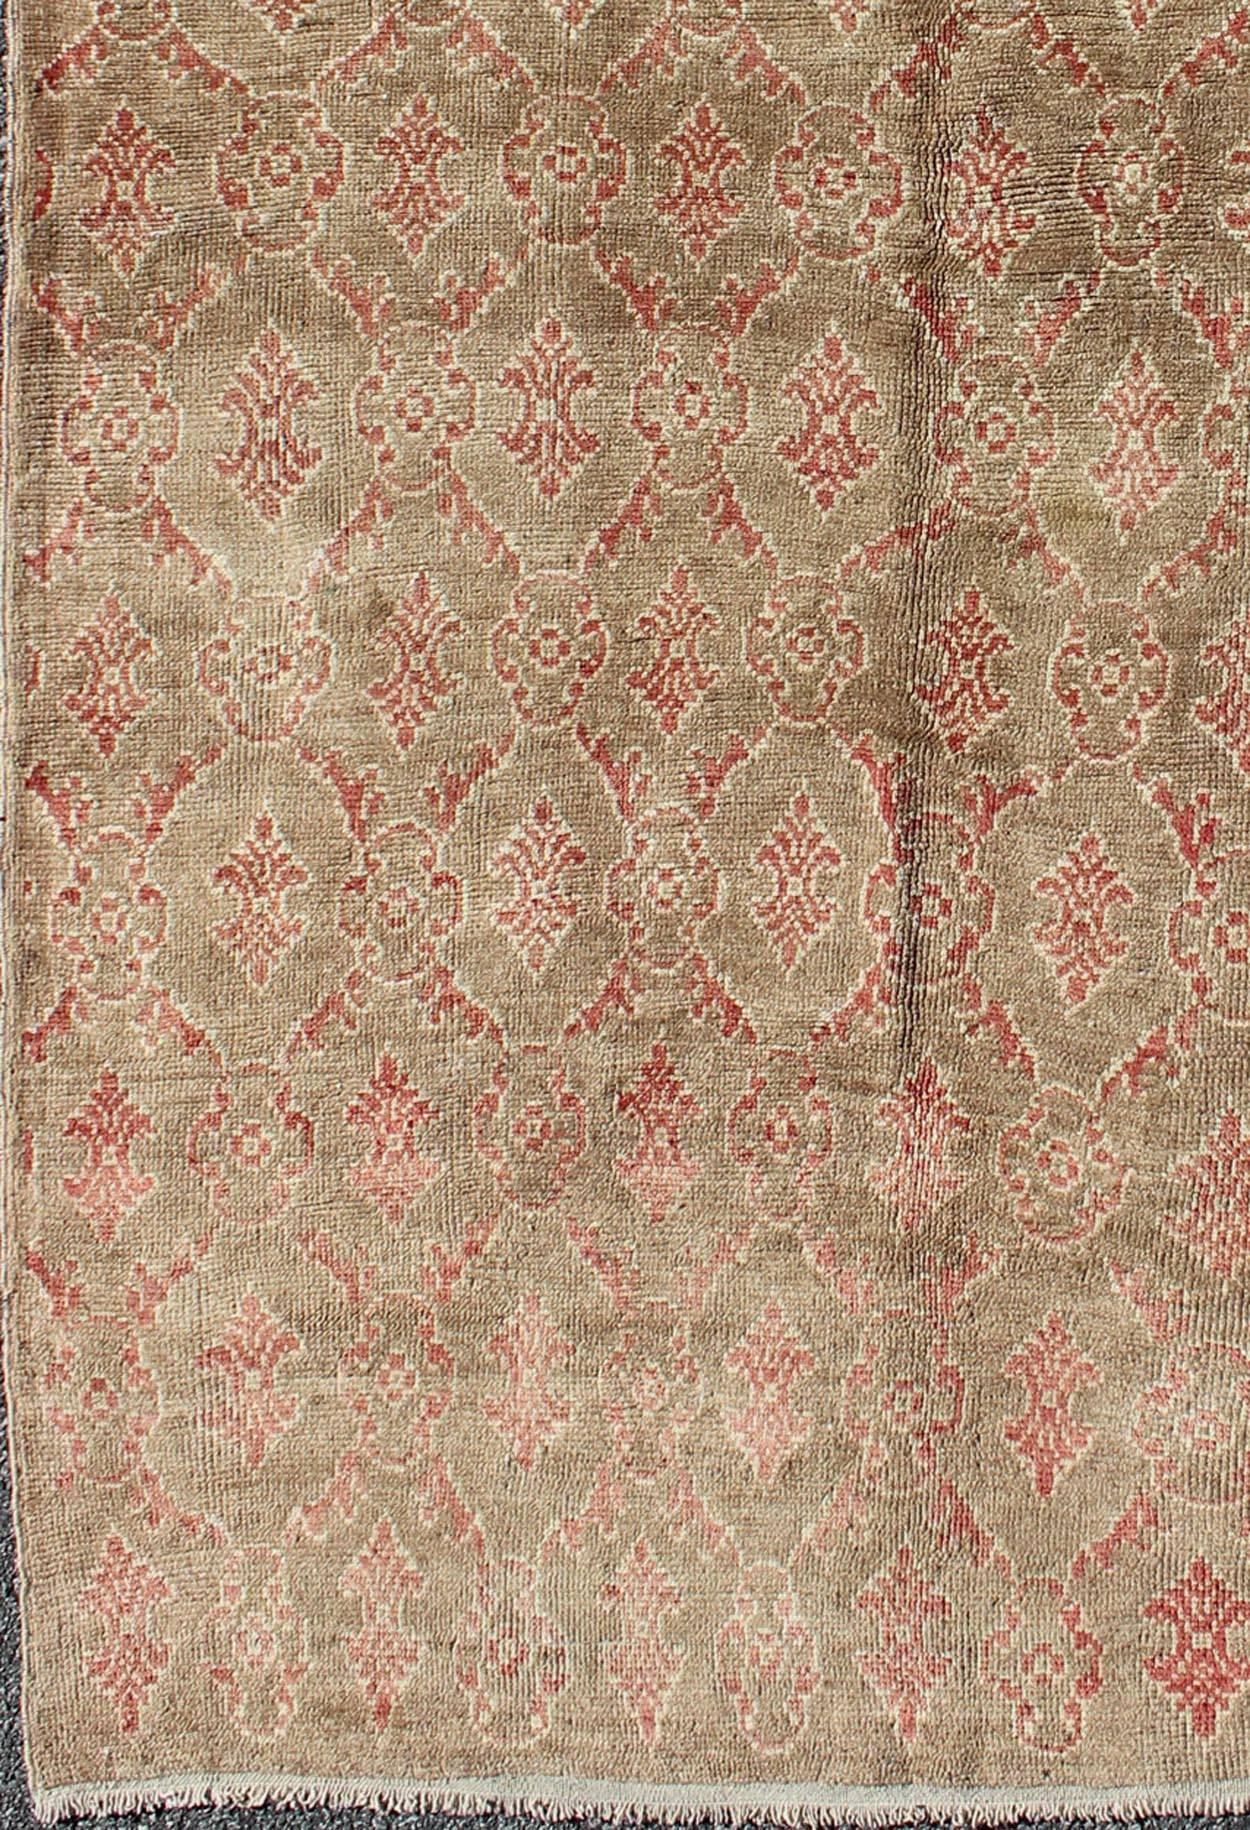 Vintage Tulu Turkish with All-Over Design in Red
rug/has-1777, origin/turkey

This unique Mid-Century Tulu carpet displays an all-over repeating pattern design set on a light tan field. Accent colors include red and cream.
Measures: 4'6 x 8'3.